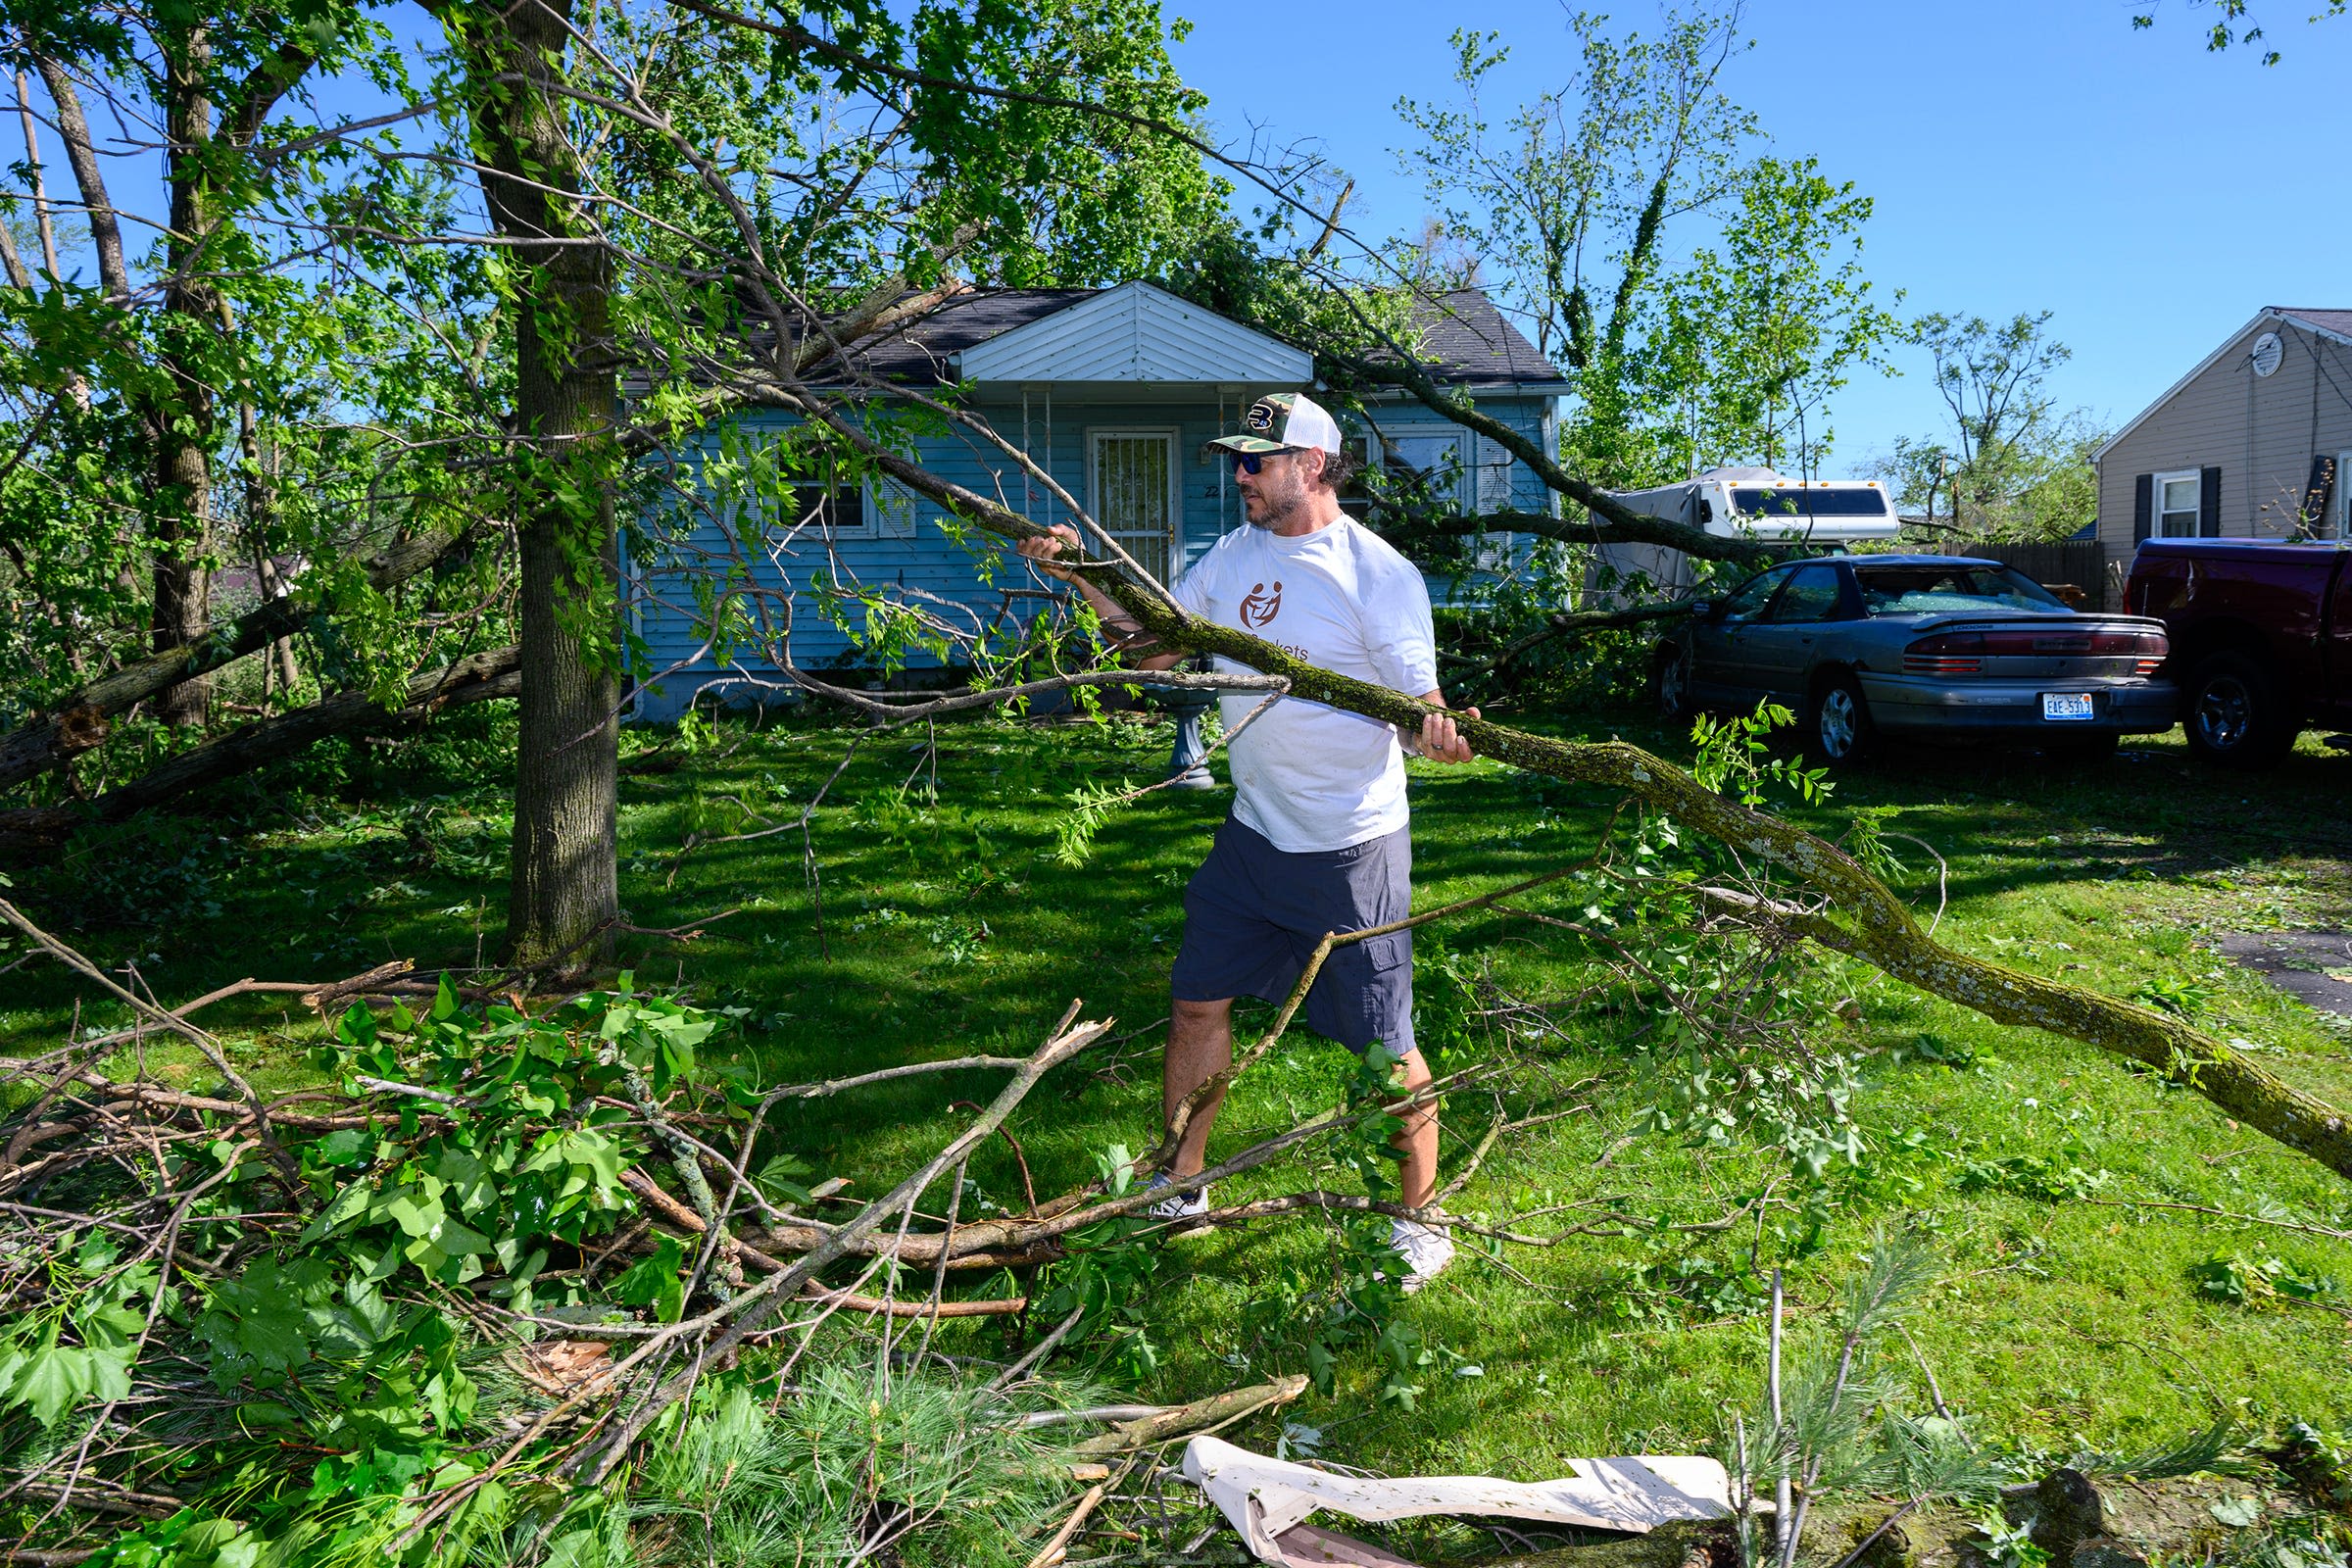 Cleanup Begins After 11 Tornadoes in Western Michigan